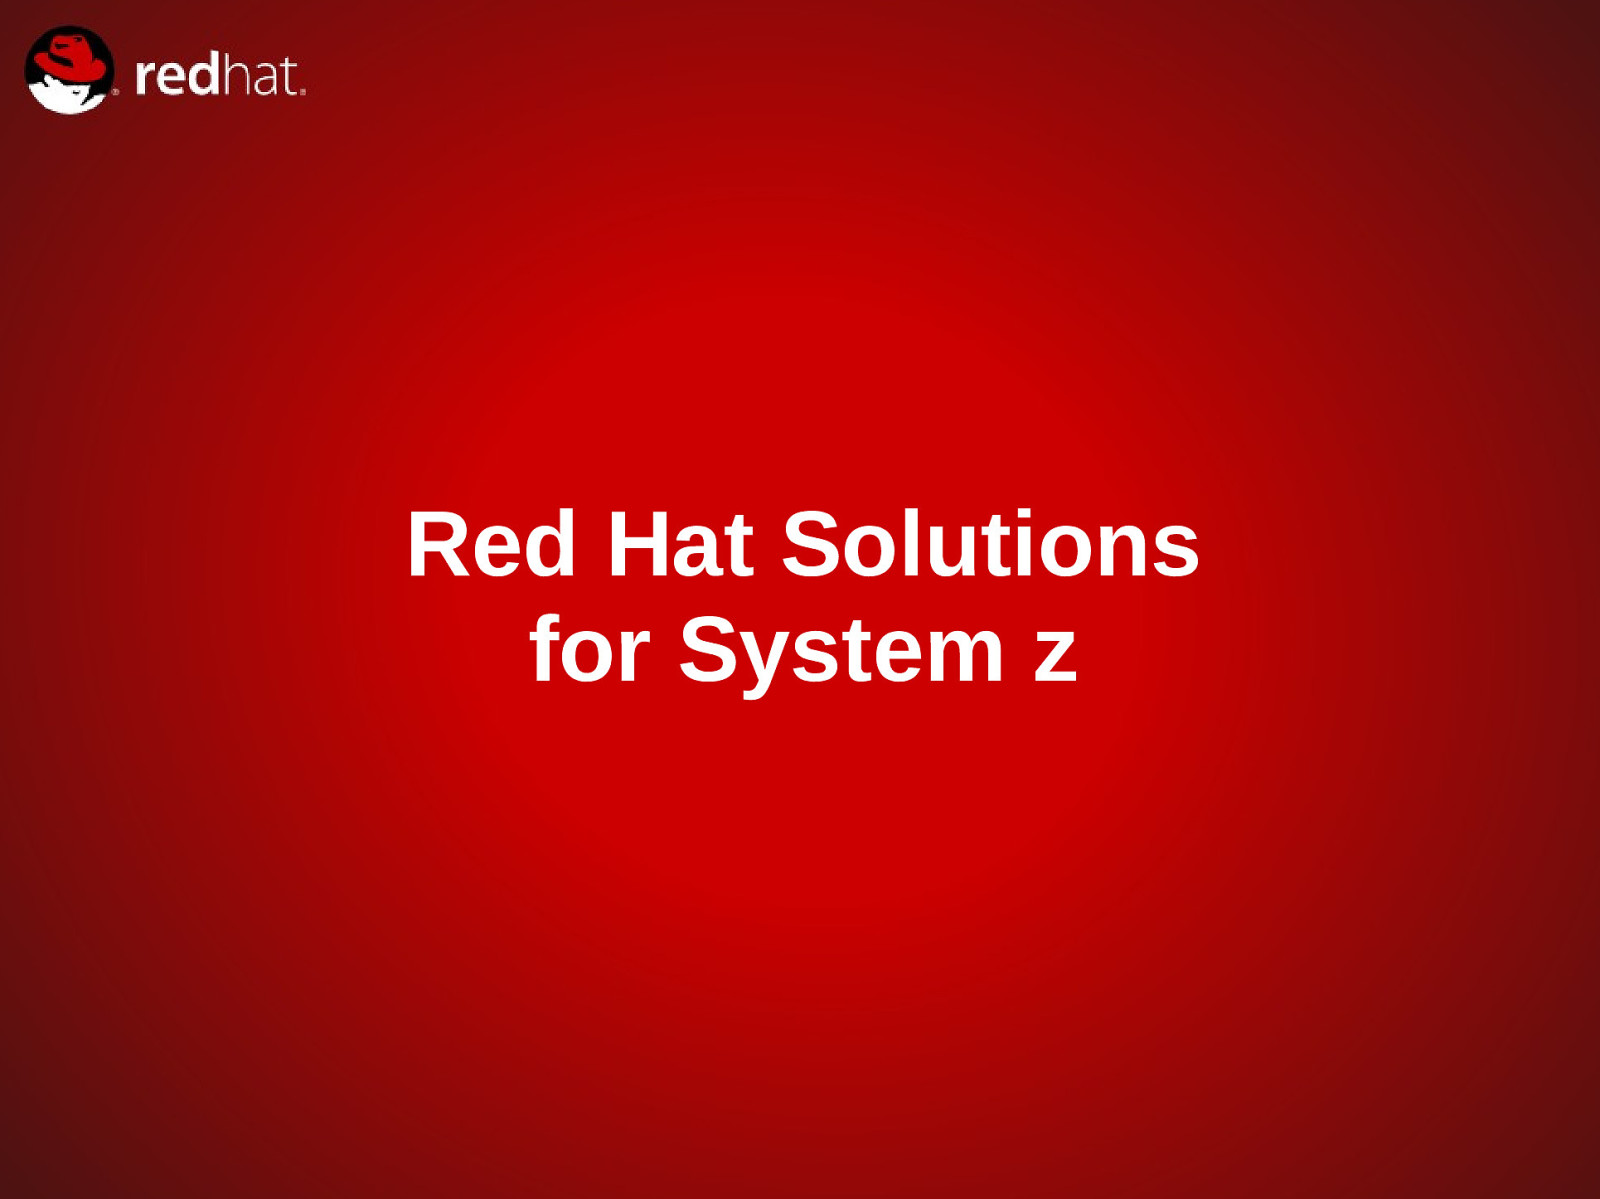 Red Hat Solutions for System z